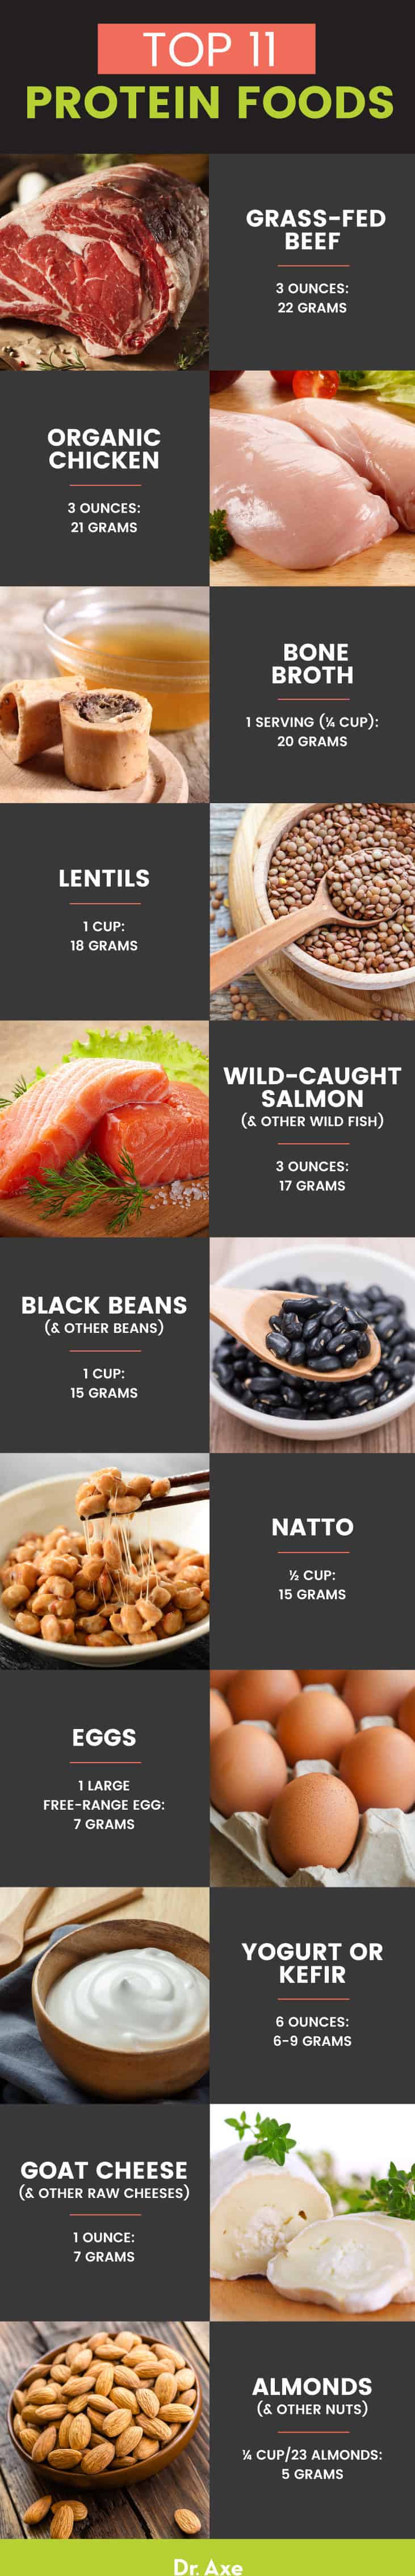 Top 11 high-protein foods - Dr. Axe